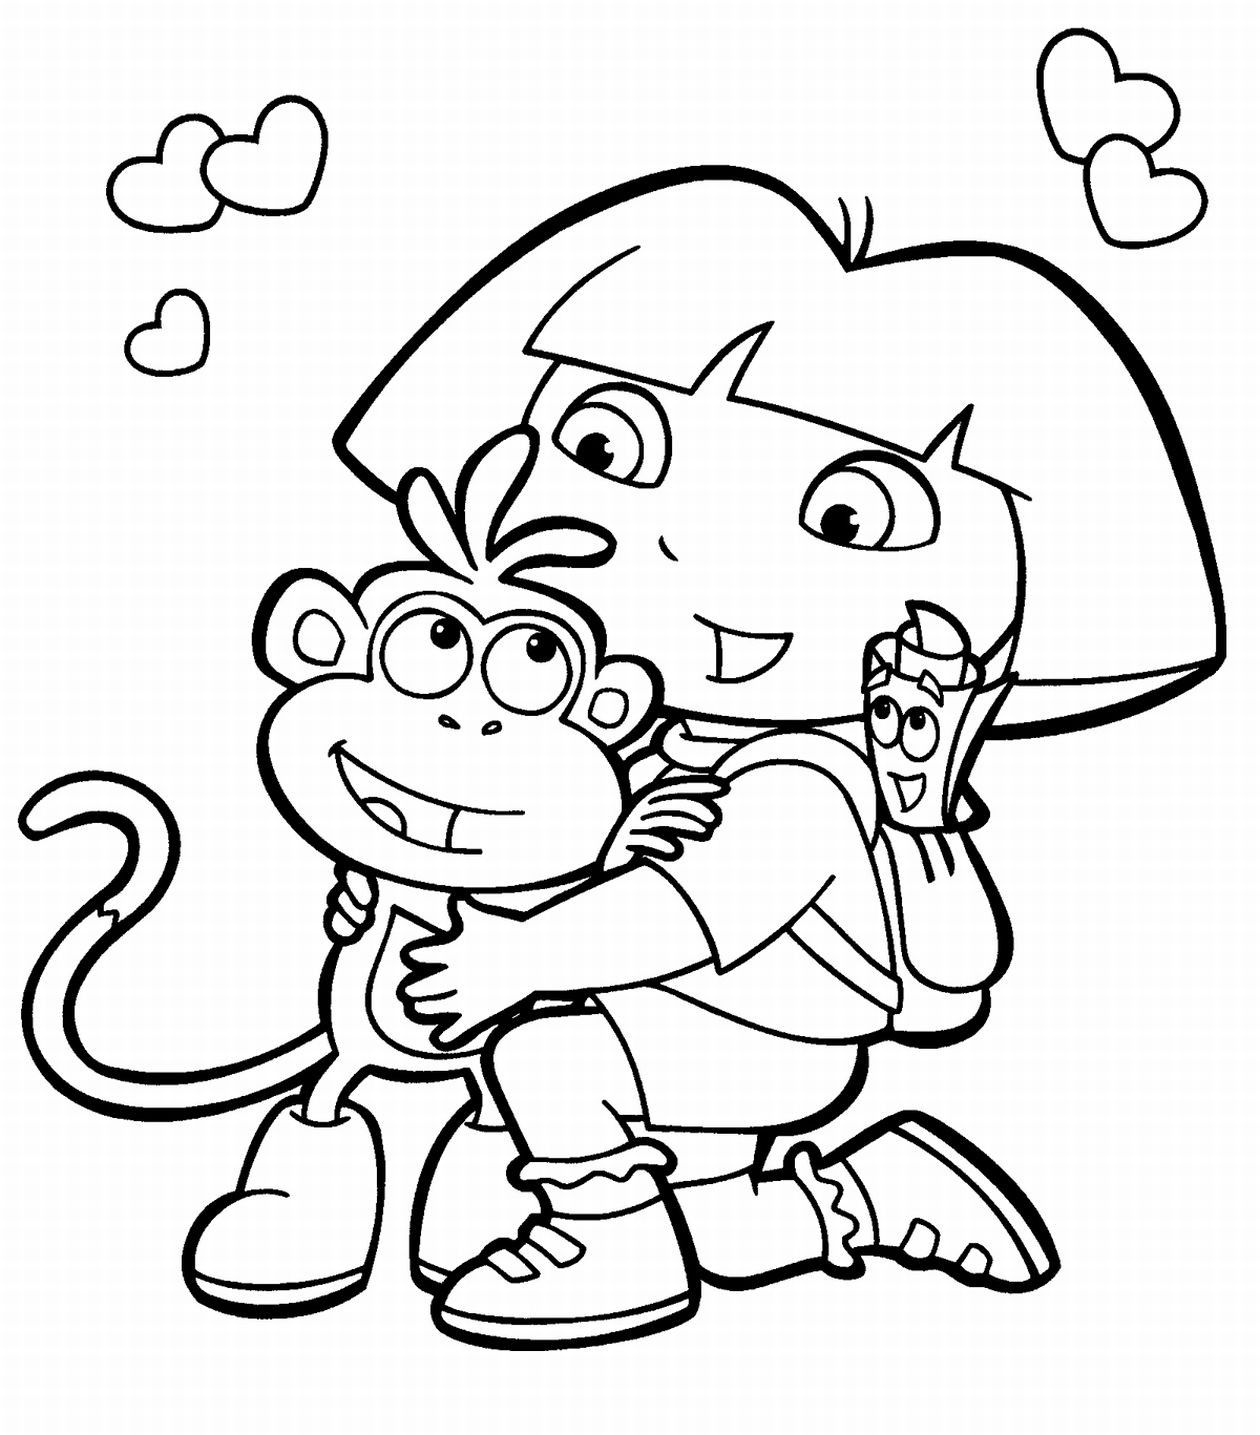 Amazing of Finest Free Coloring Pages For Kids From Free #262